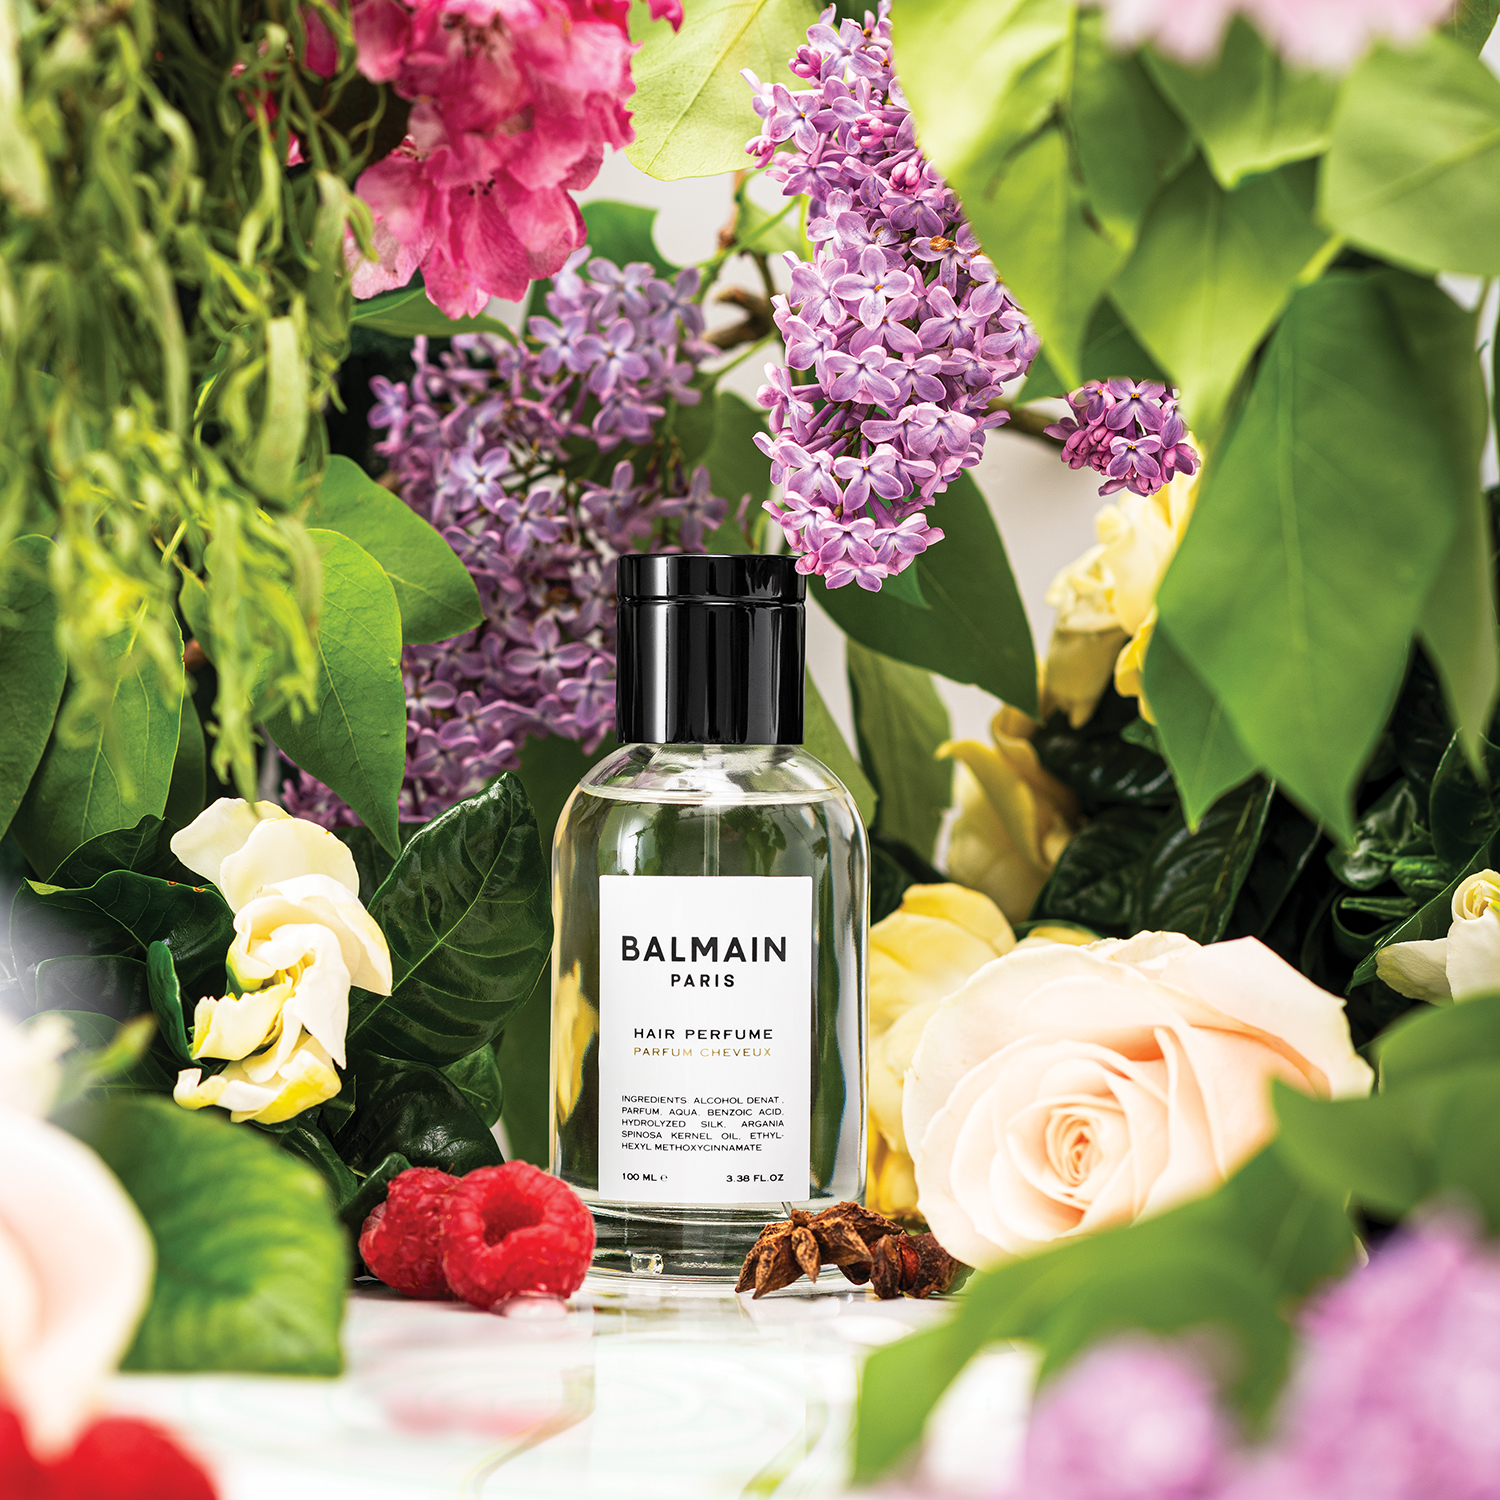 Balmain Hair UK on Twitter: "HAIR PERFUME SIGNATURE FRAGRANCE Enjoy the uplifting power of the signature Balmain Hair Couture fragrance its newly designed bottle. The Hair Perfume now comes with a